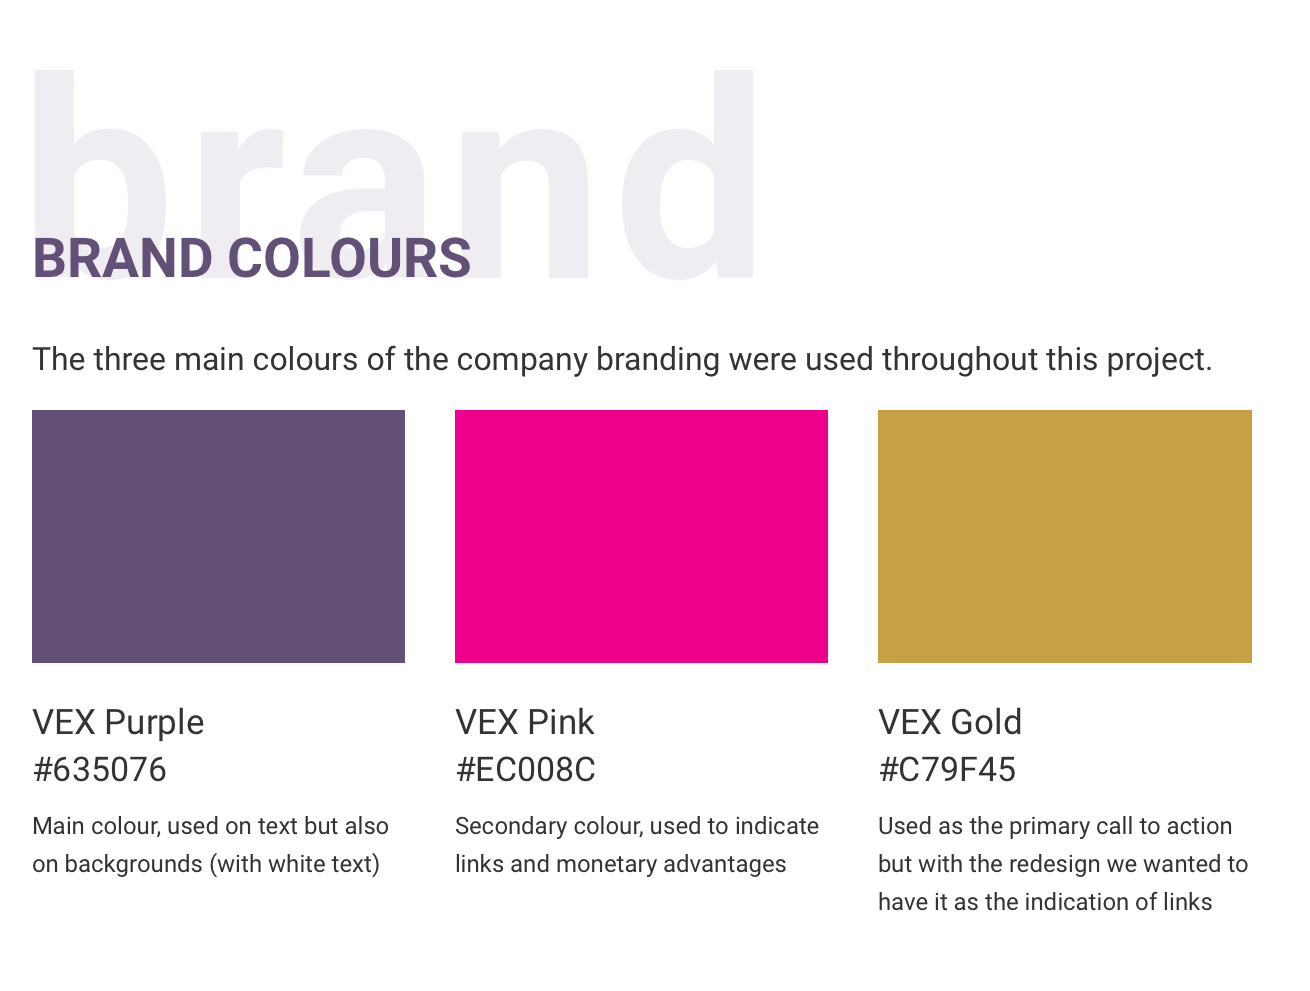 the three main brand colours that were used through out this project. VEX Purple, VEX Pink and VEX Gold